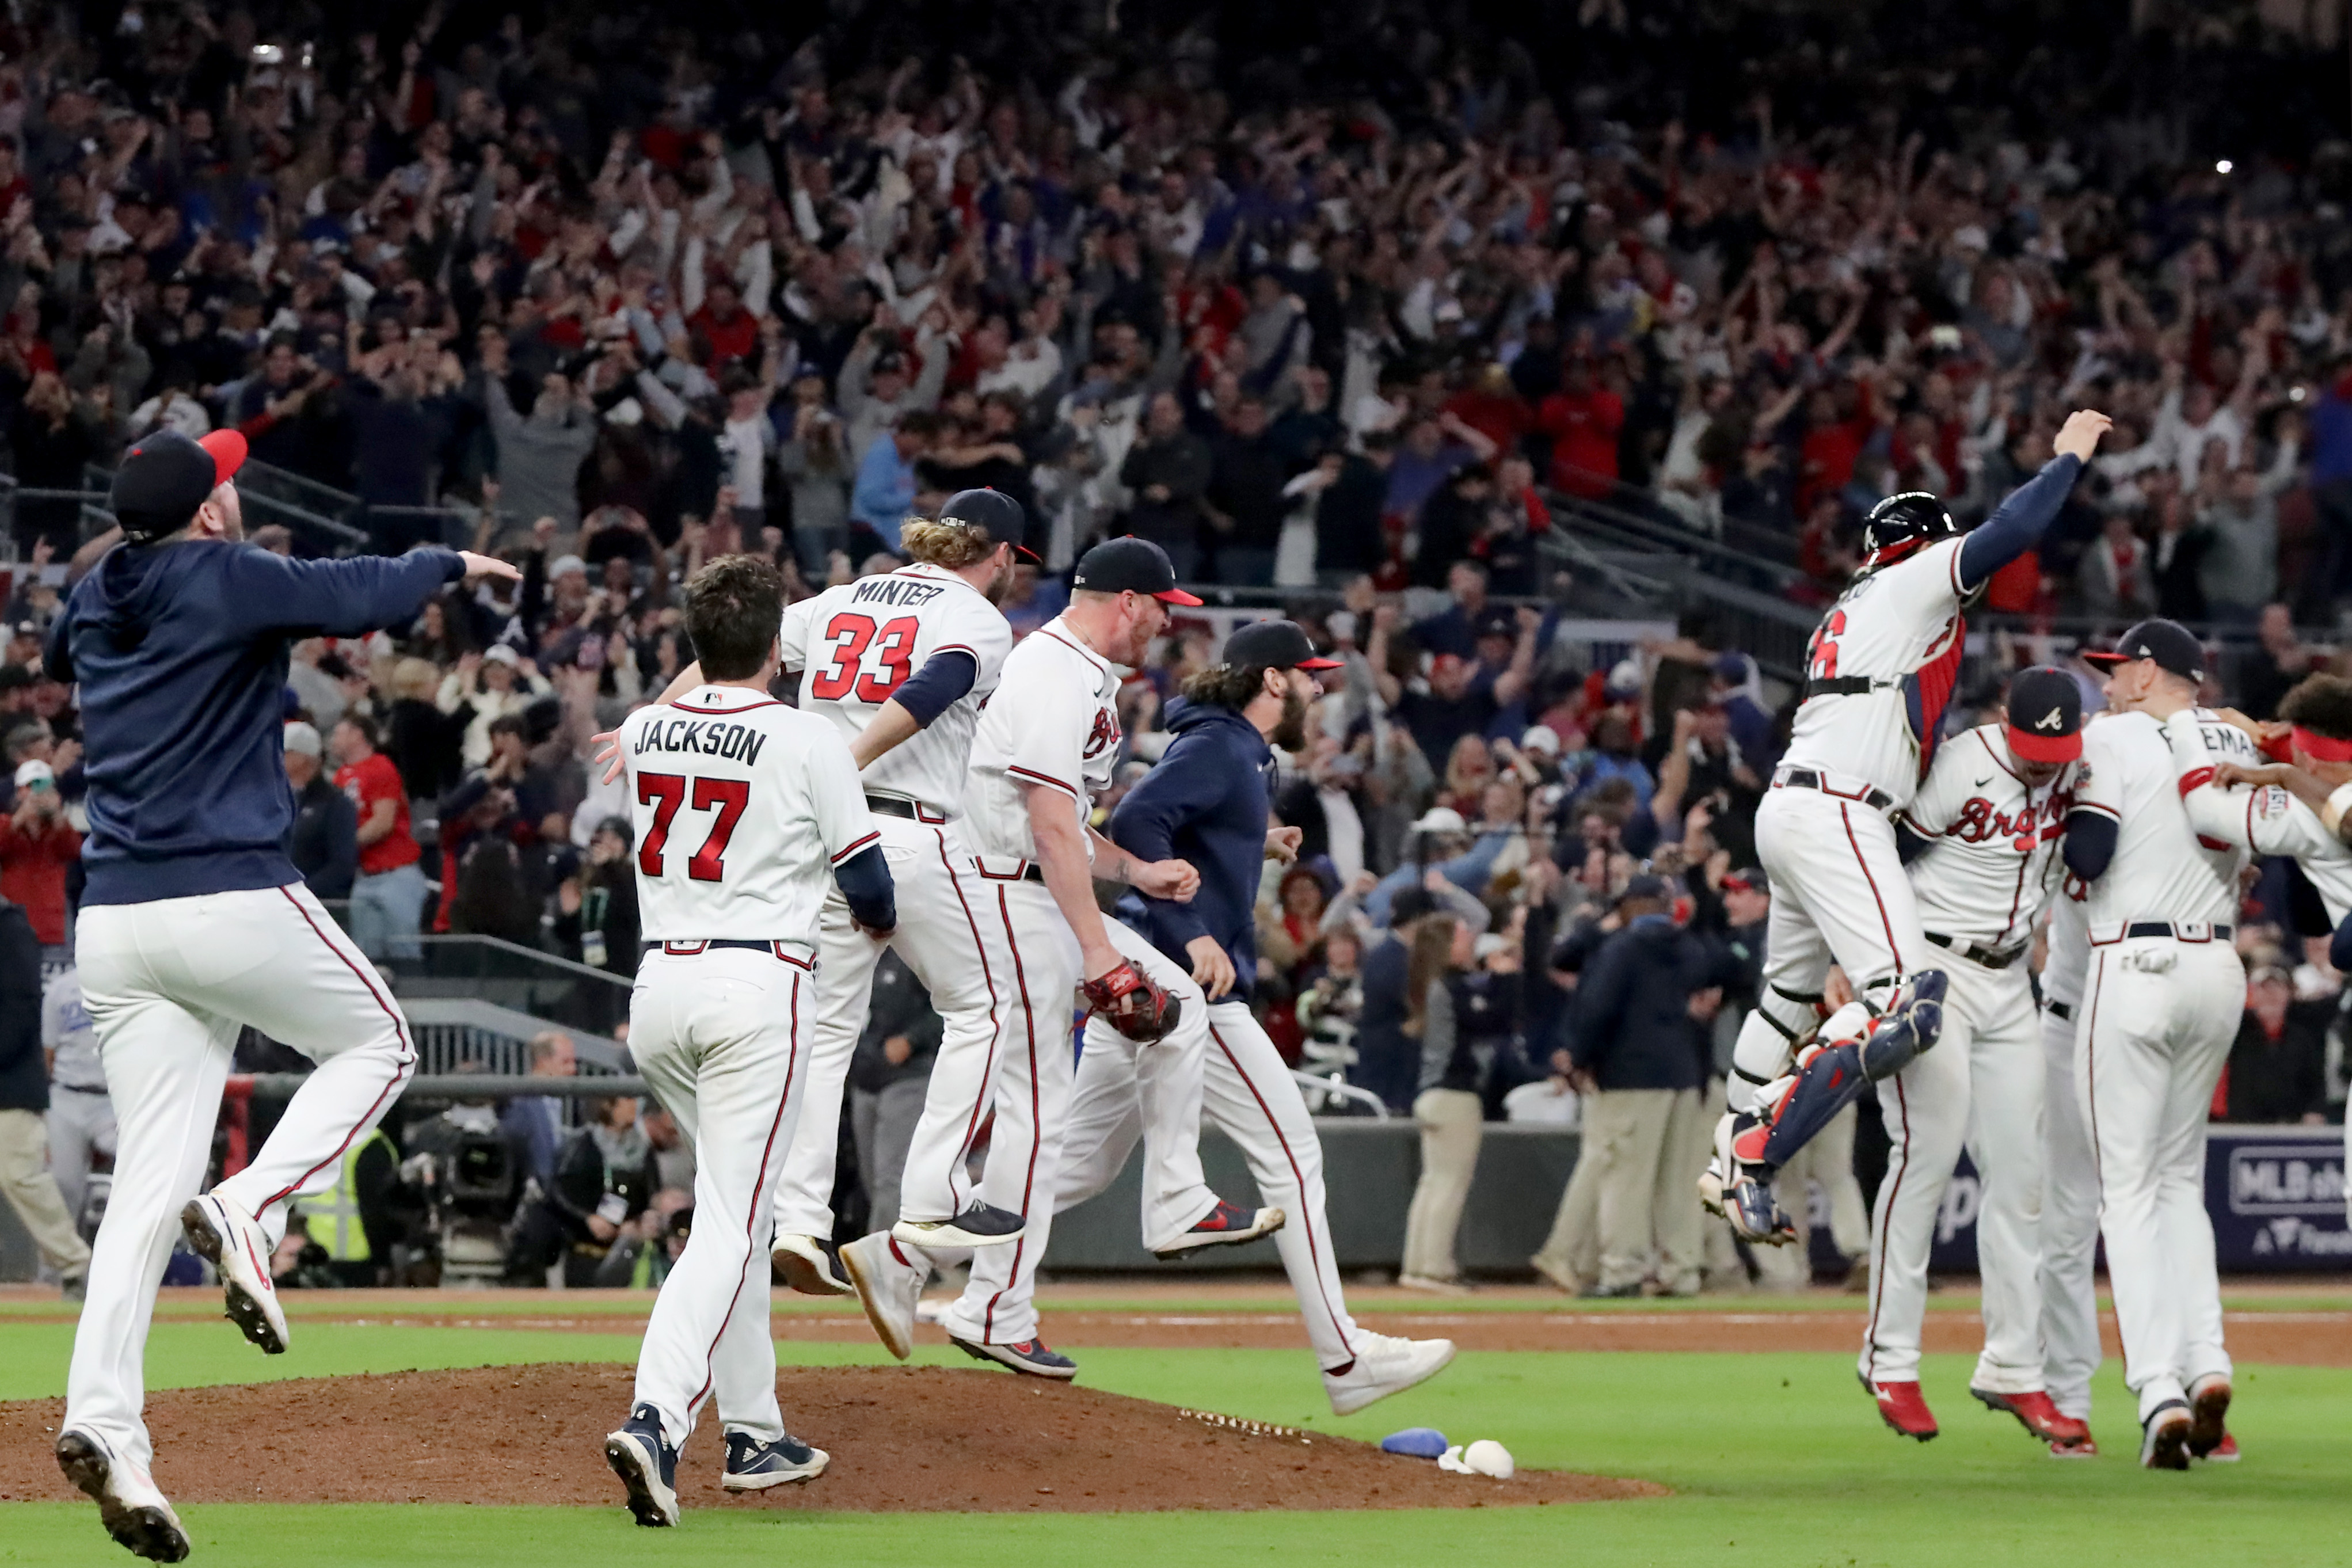 3 Takeaways from the Braves recent series with the Dodgers